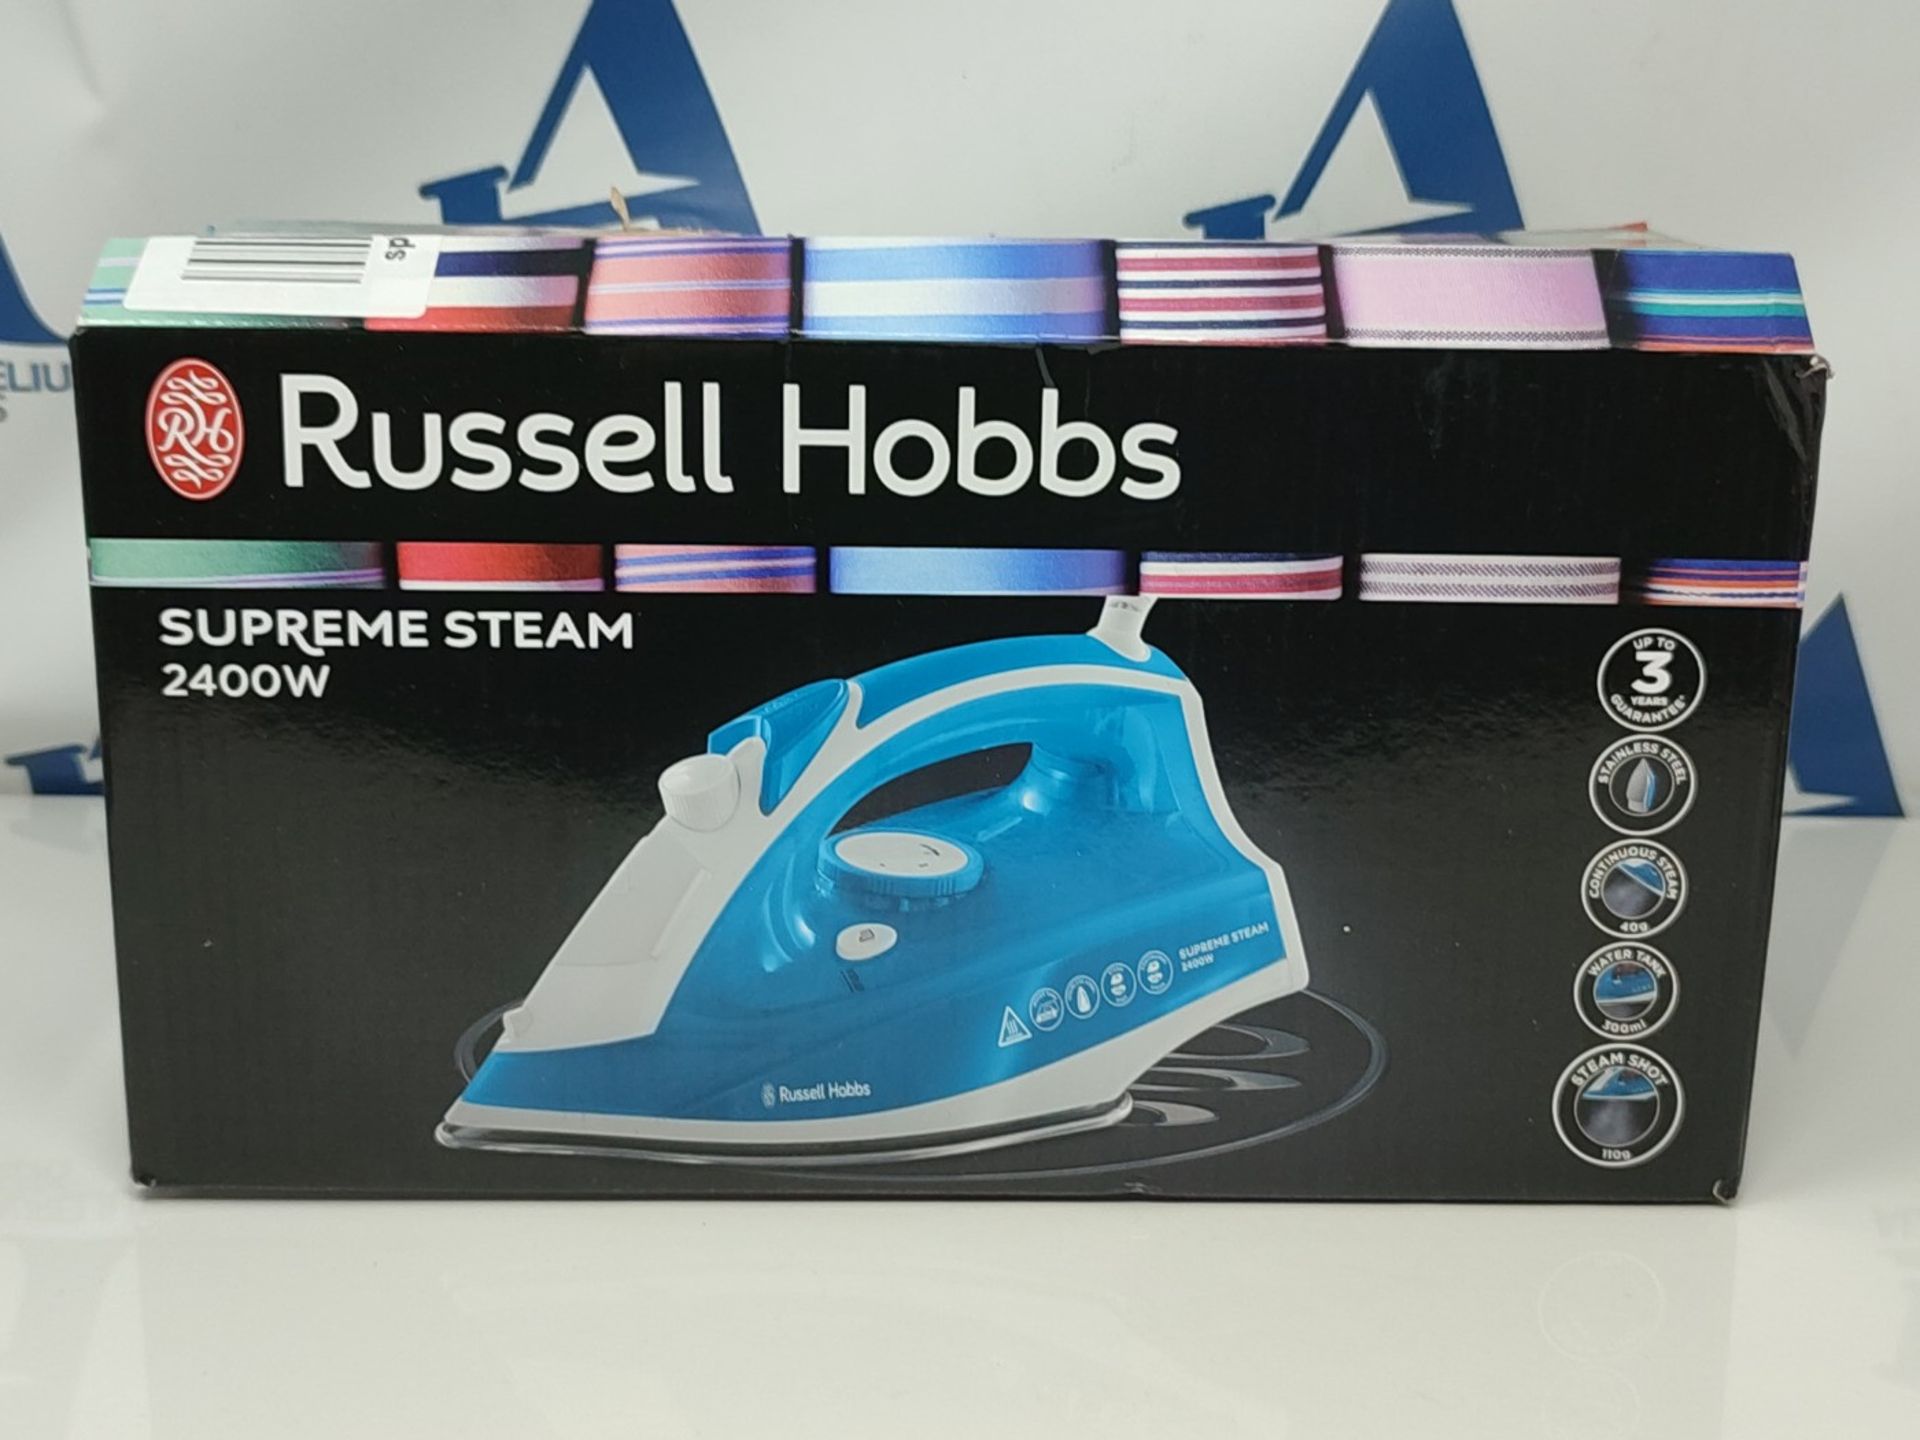 Russell Hobbs Supreme Steam Traditional Iron 23061, 2400 W, White/Blue - Image 2 of 3